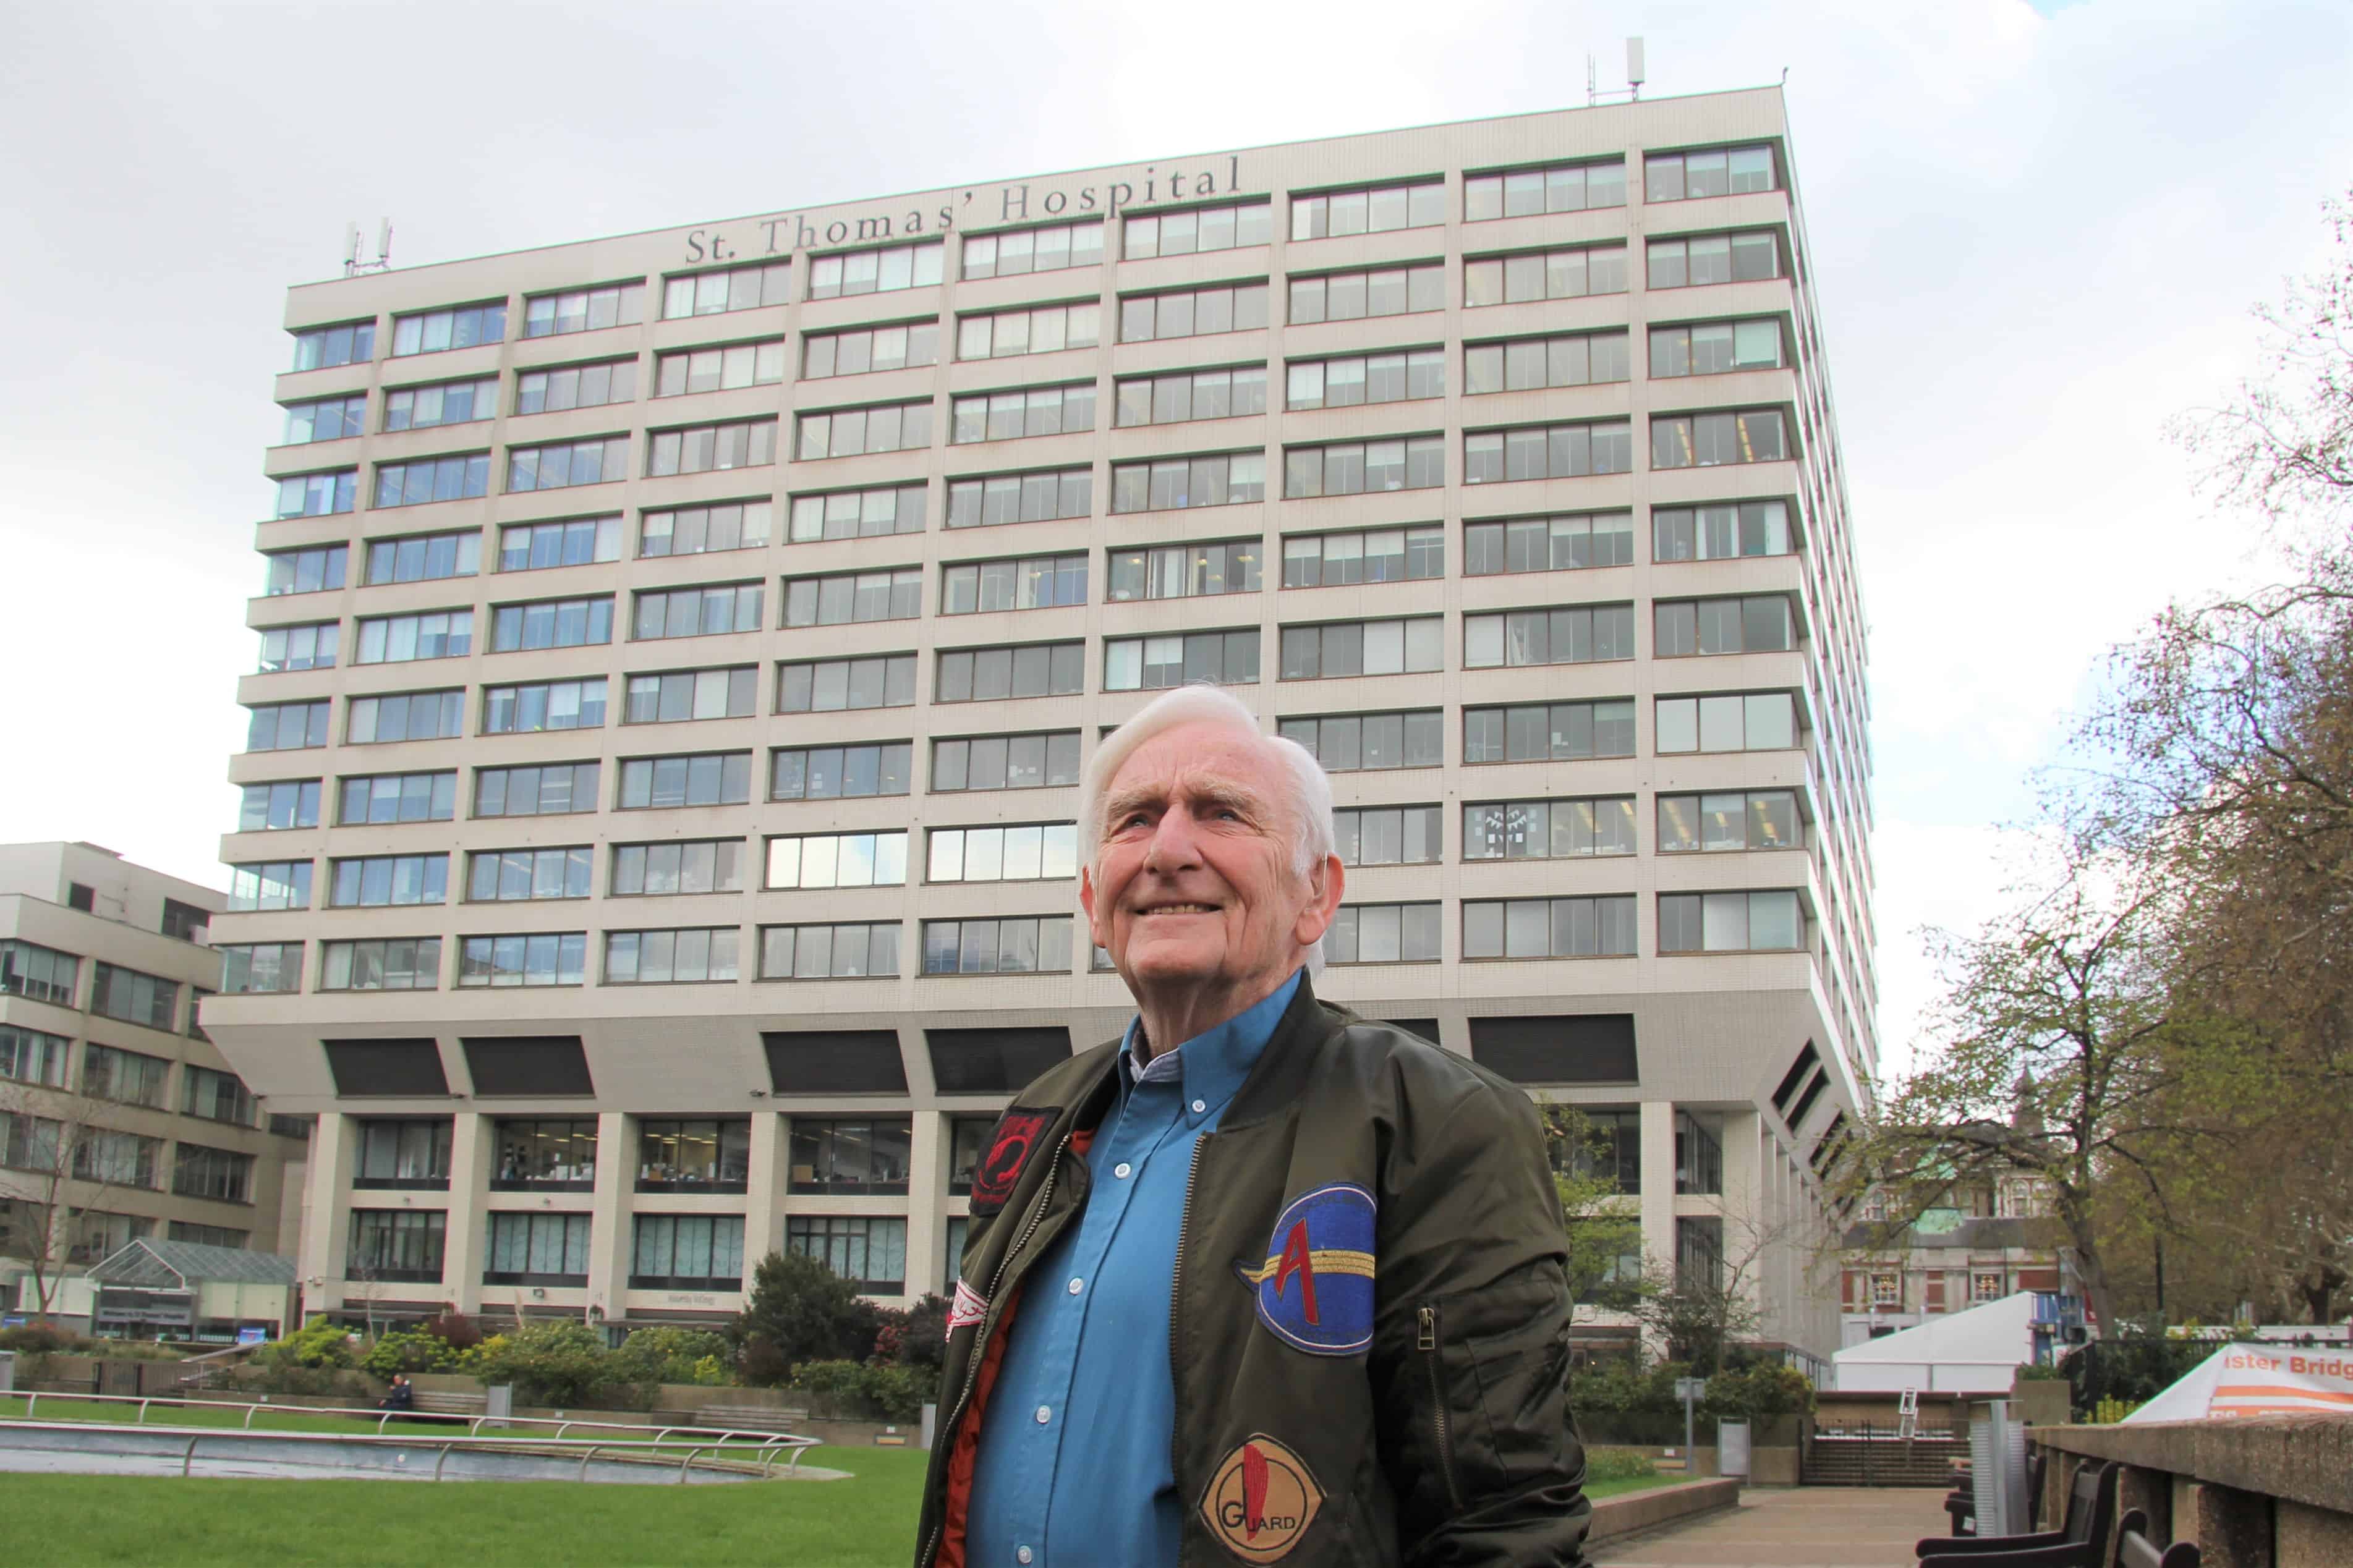 89-year-old Frank pictured outside of St Thomas' Hospital